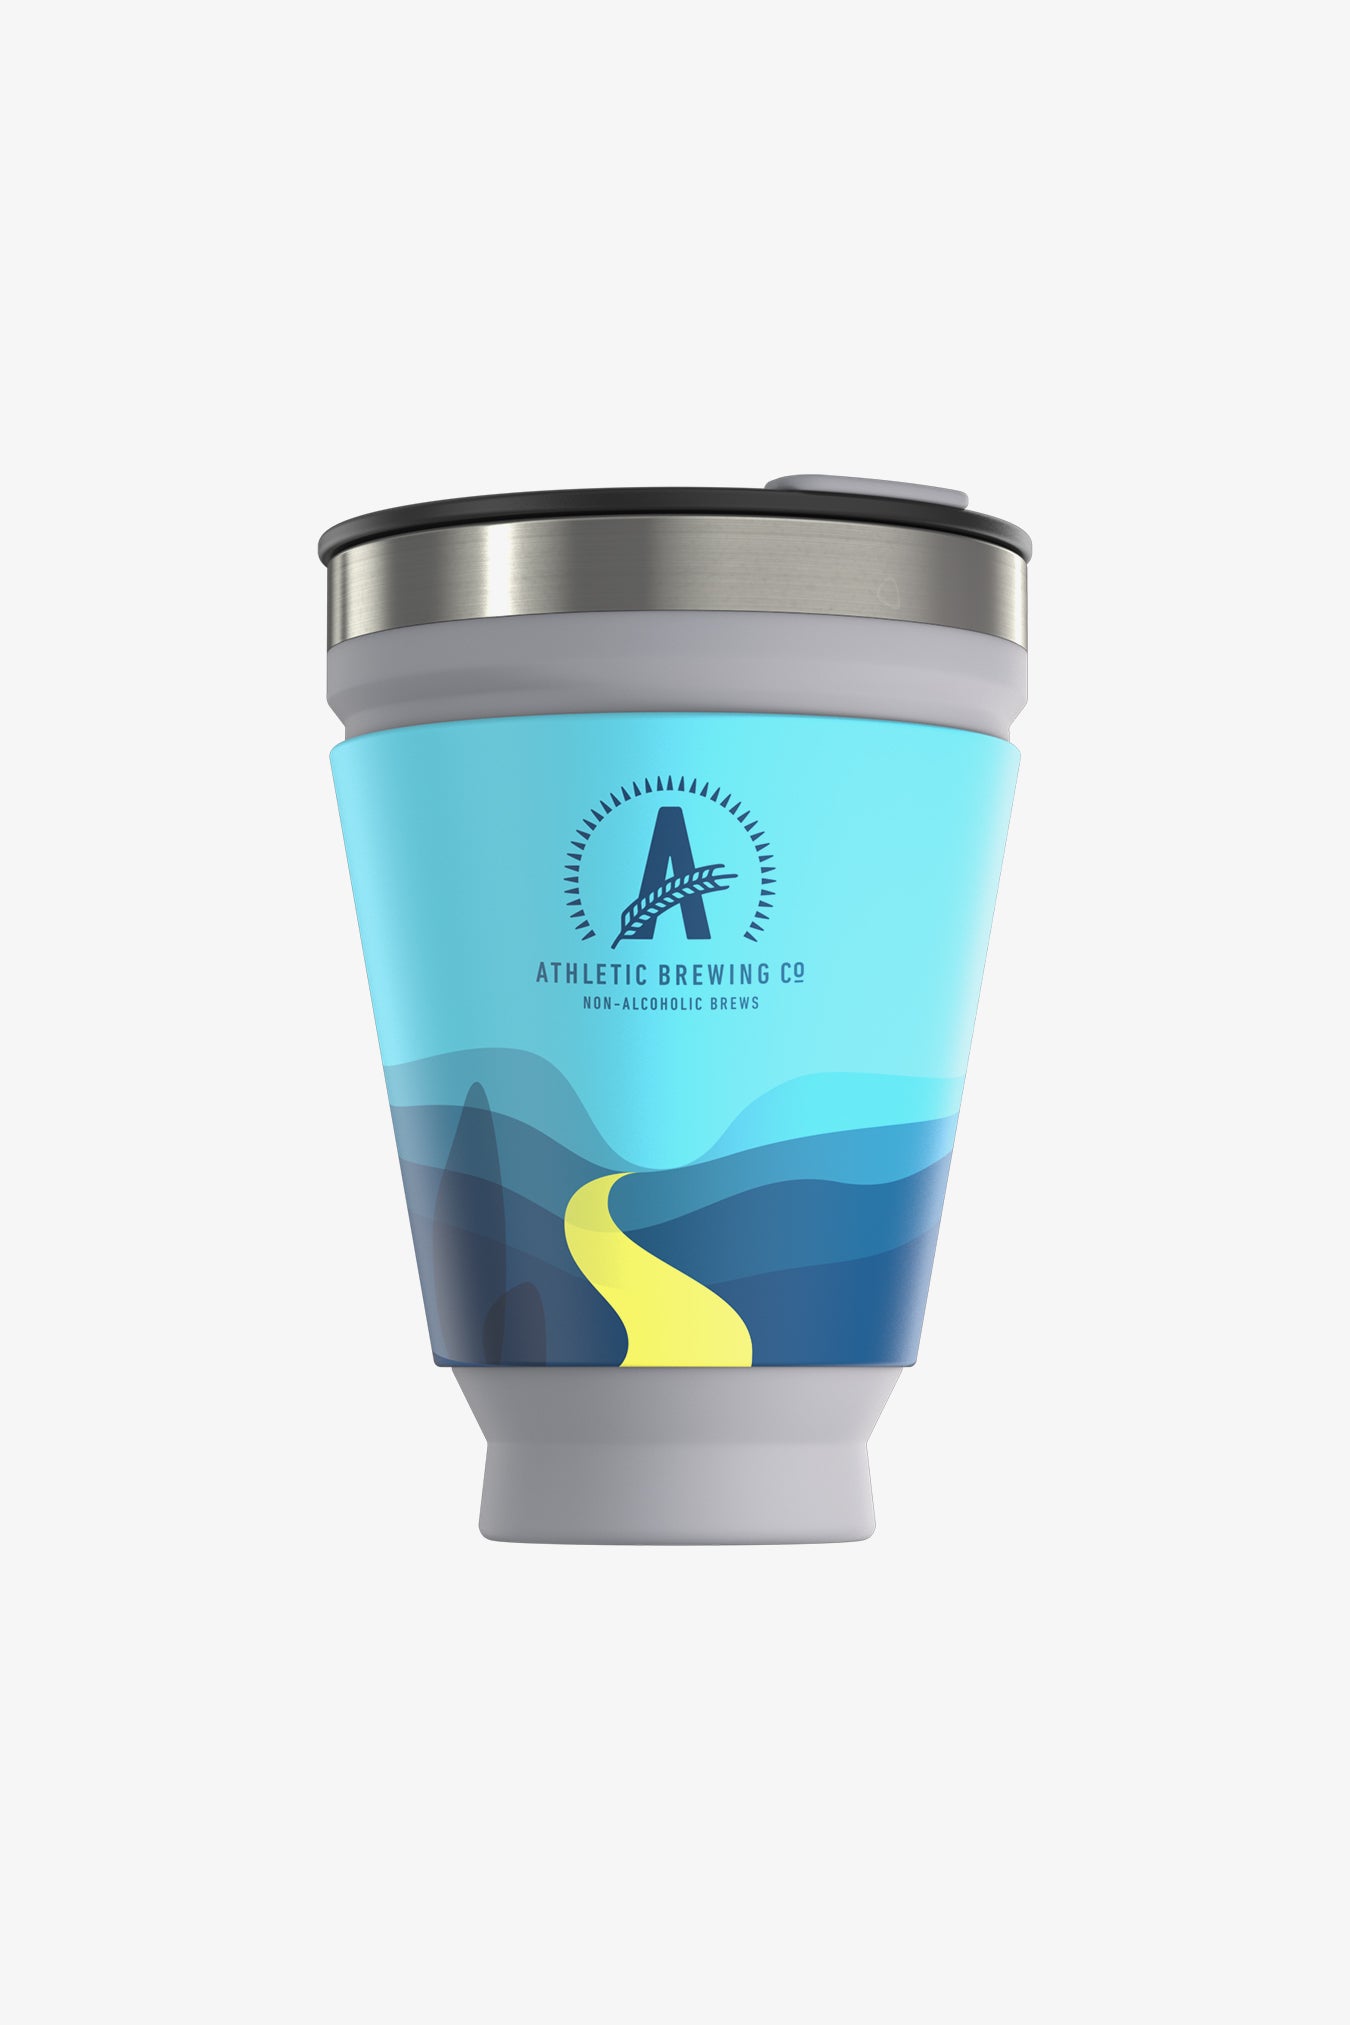 Collapsible Insulated Drink Tumbler – HYDAWAY Official Store